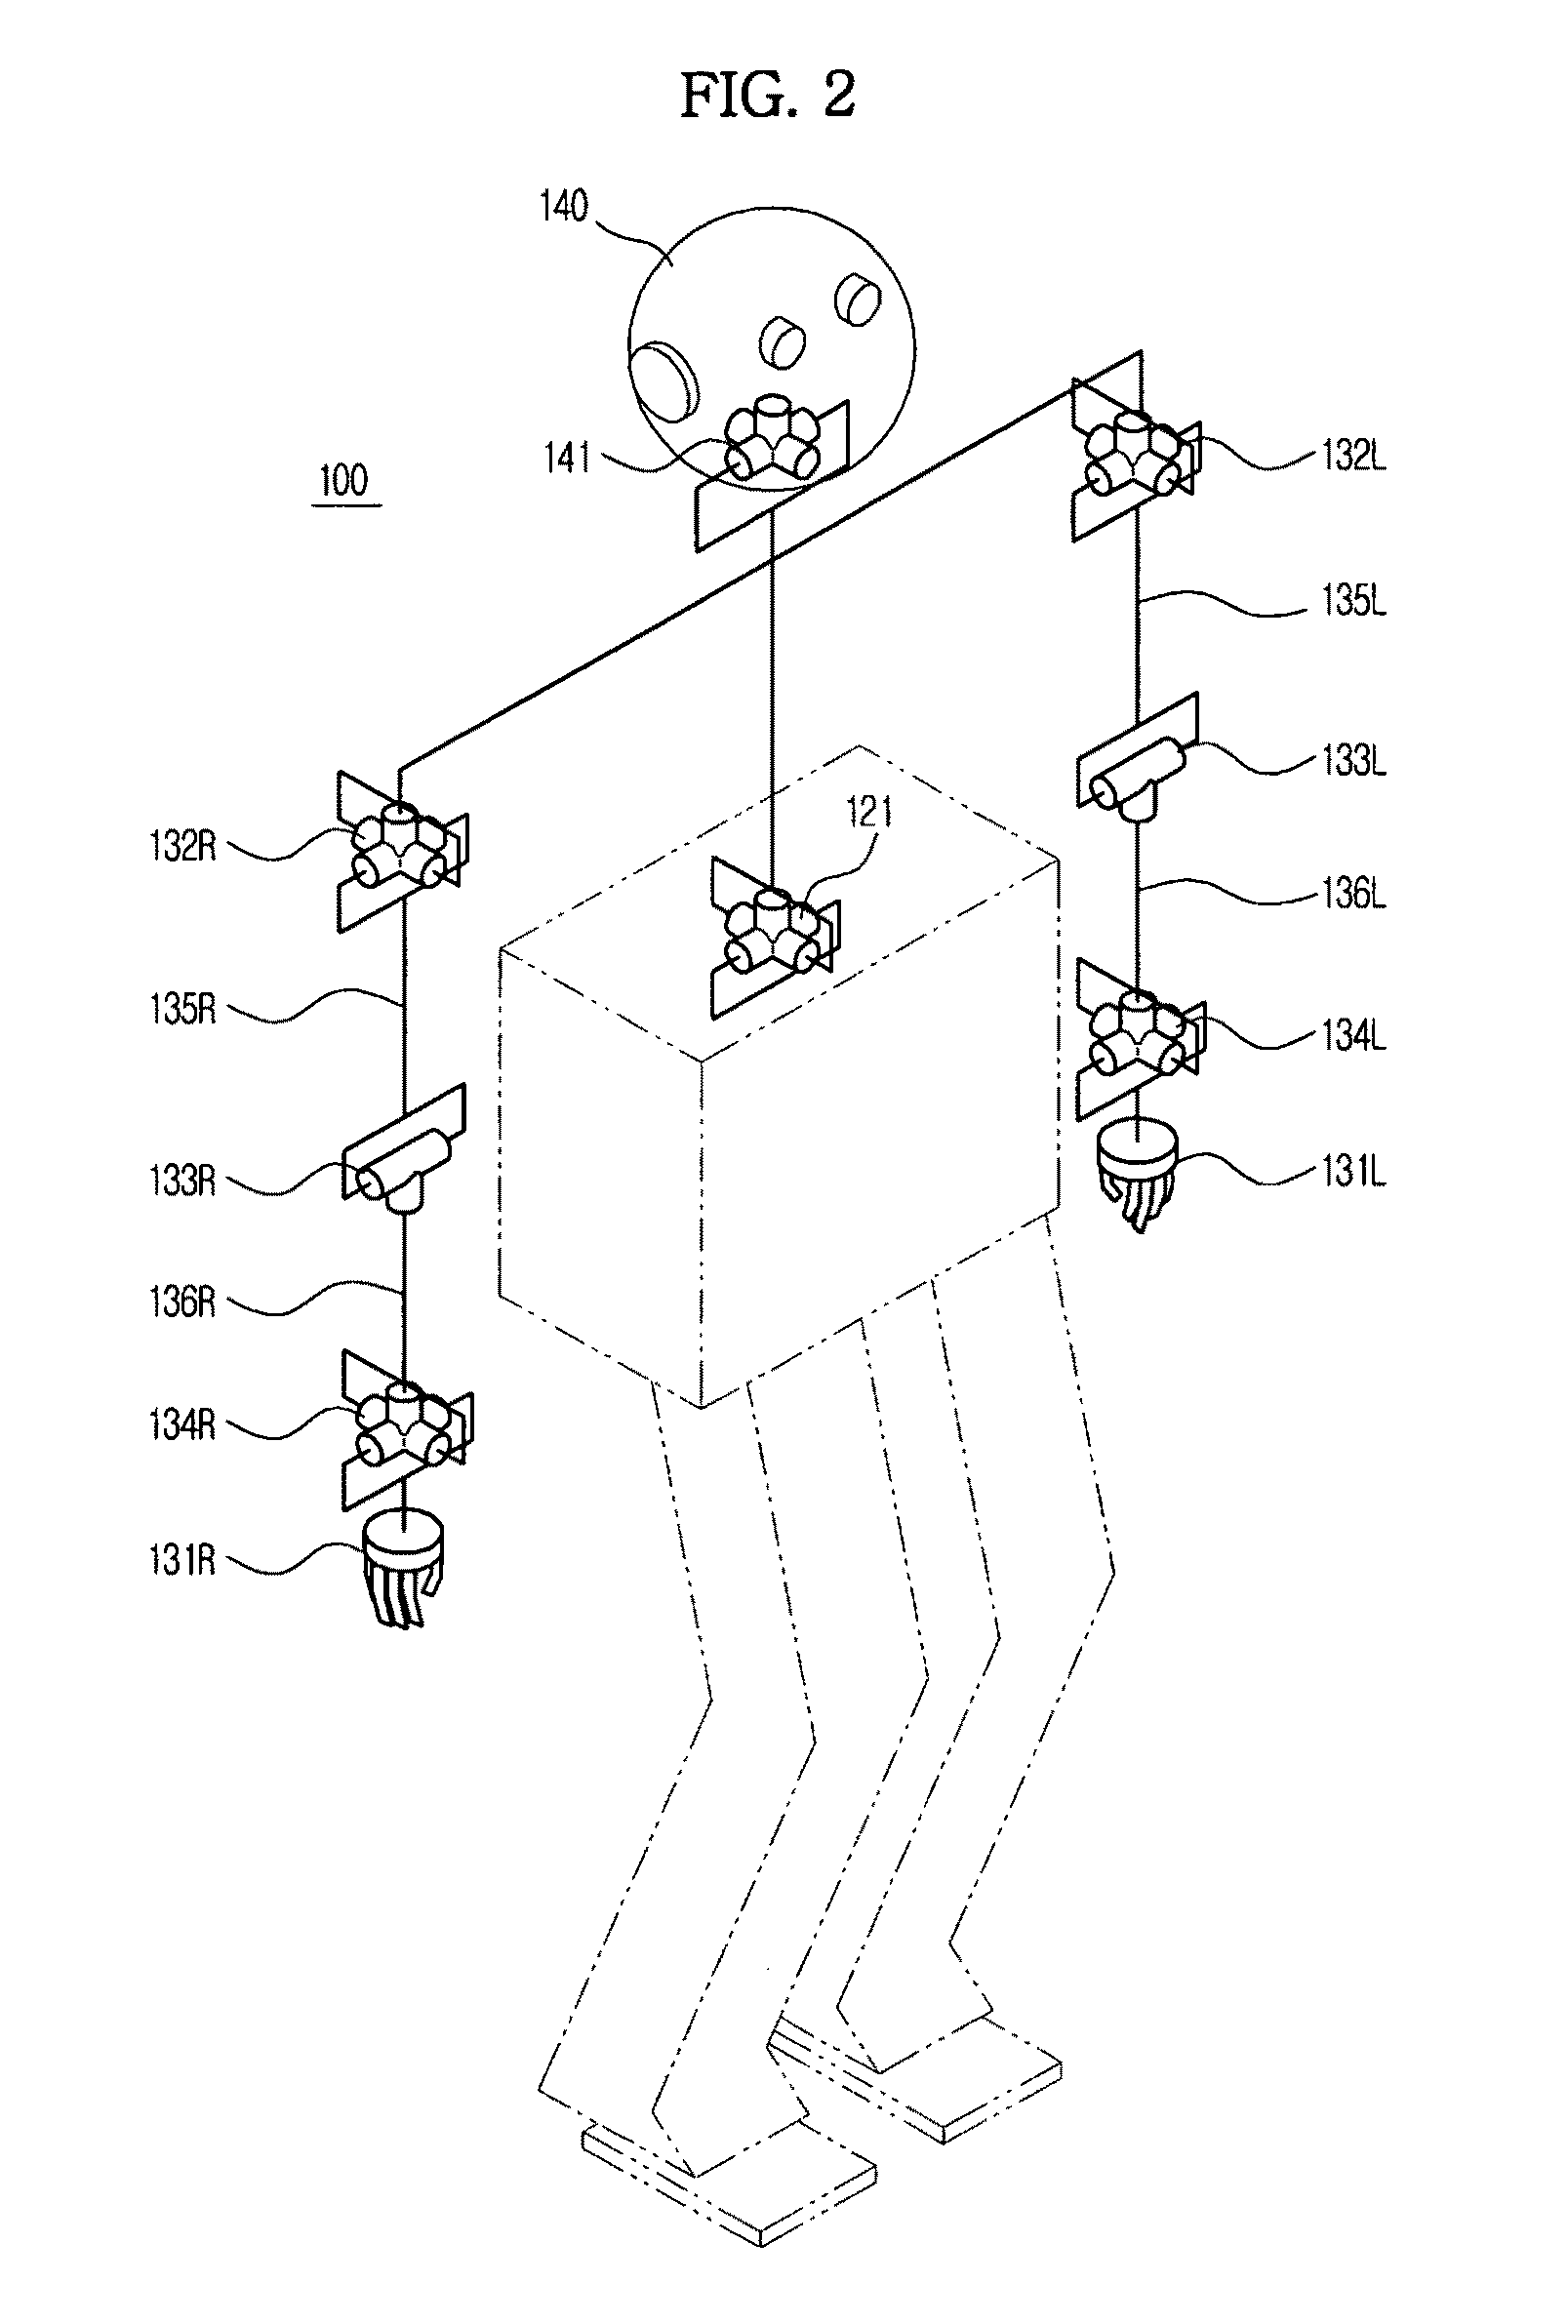 Path planning apparatus and method for robot